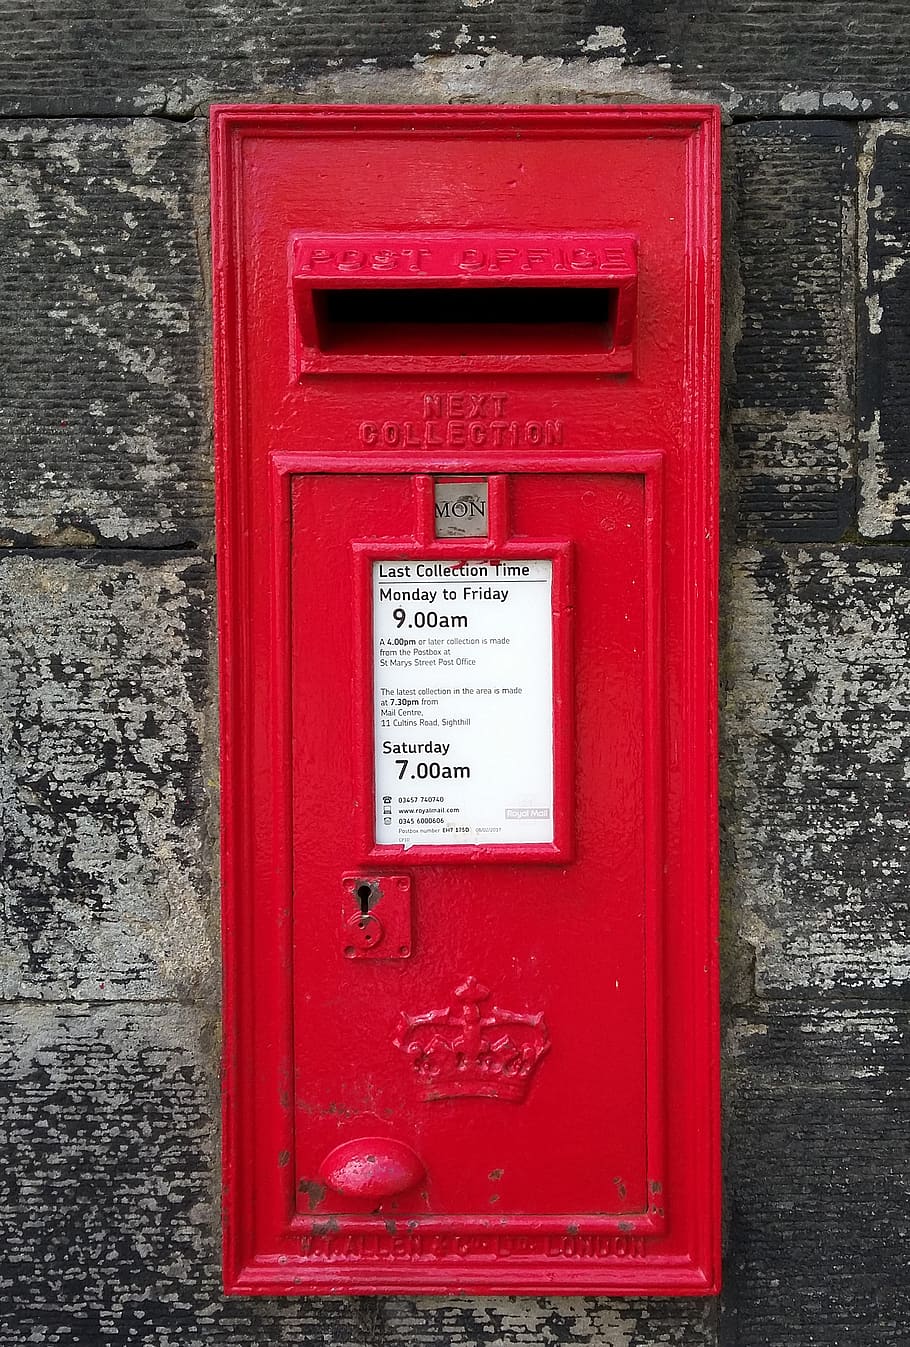 post, postbox, post box, mailbox, mail, letters, communication, delivery, postal, metal